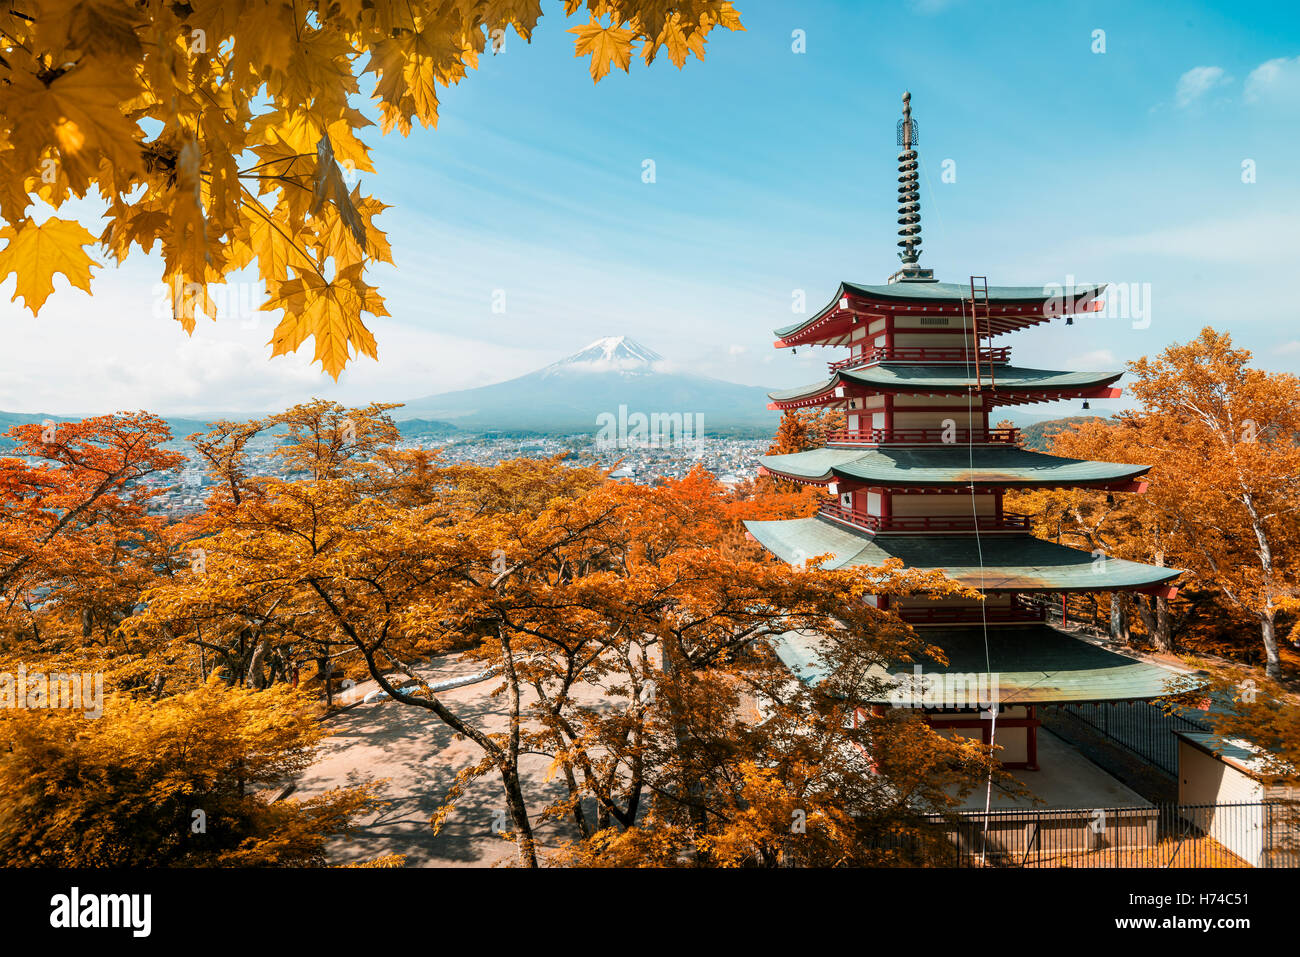 Mt. Fuji und rote Pagode mit Herbst Farben in Japan, Japan Herbstsaison. Stockfoto